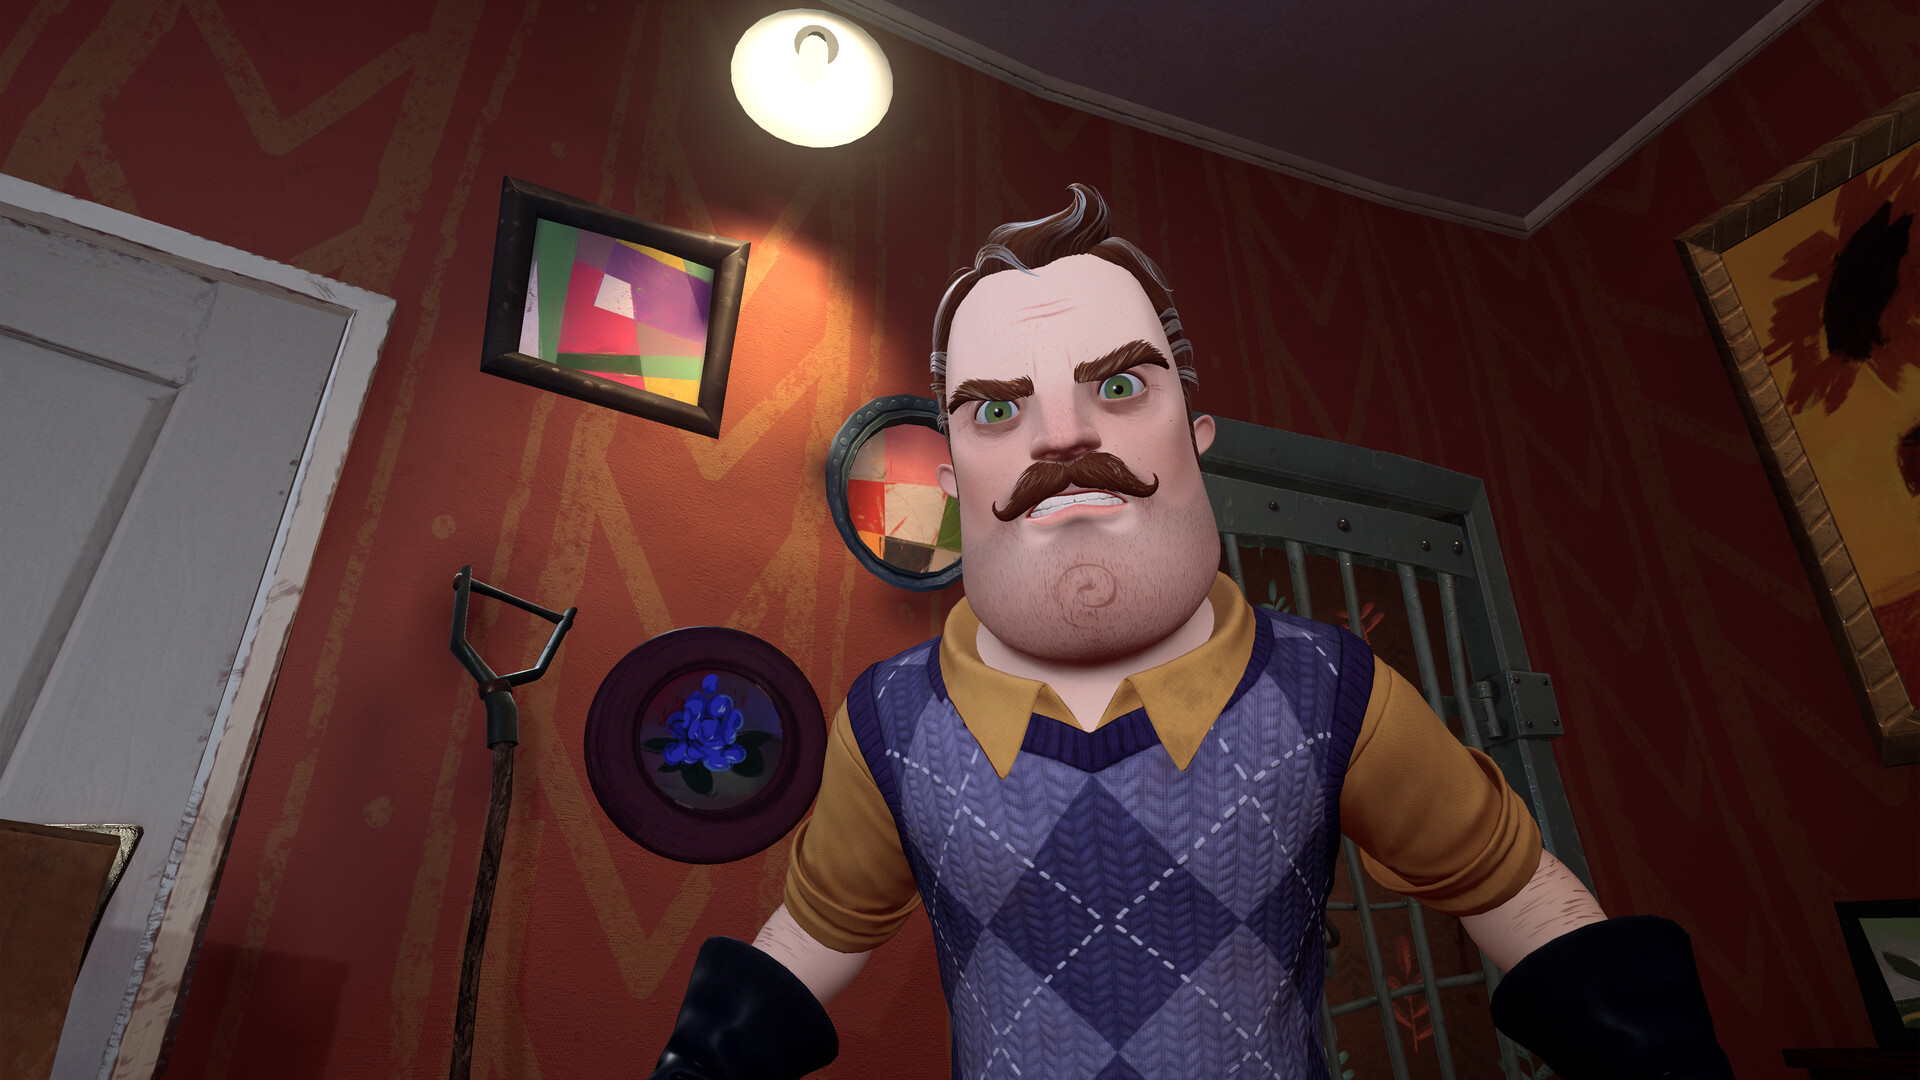 Hello Neighbor VR: Search and Rescue Steam CD Key 7.23 $